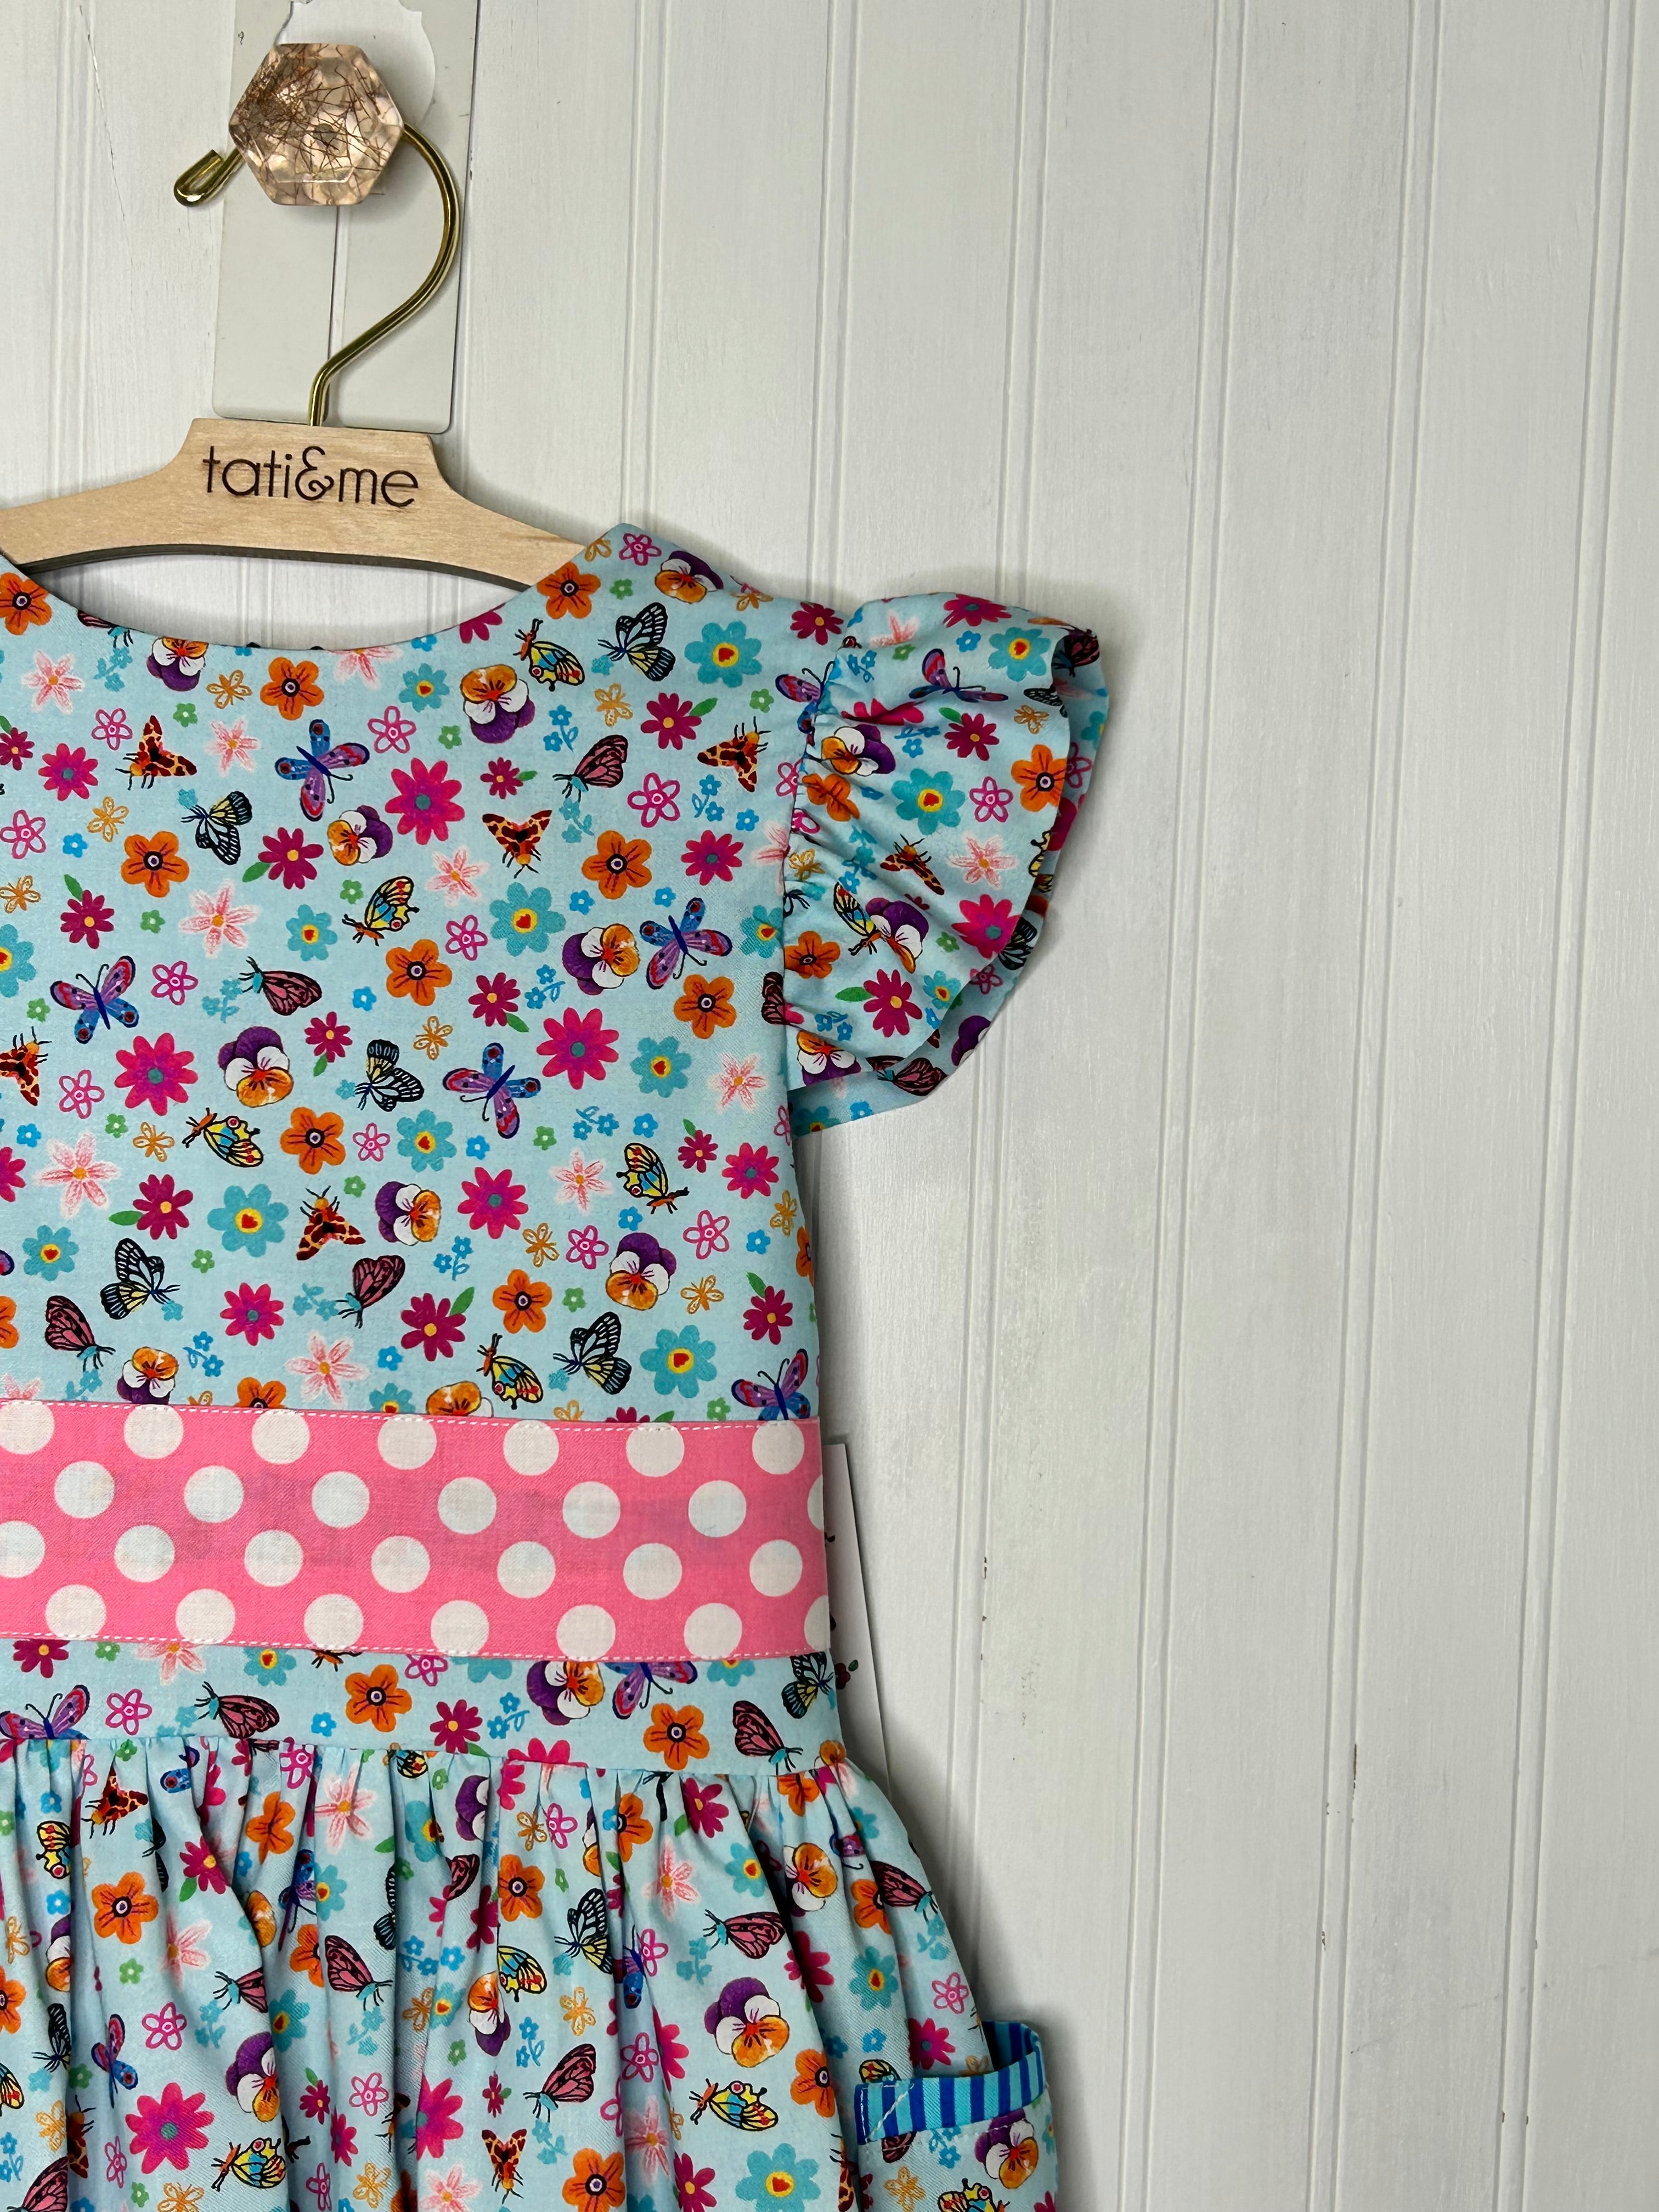 Dainty Floral Pocket Dress- 5 year old